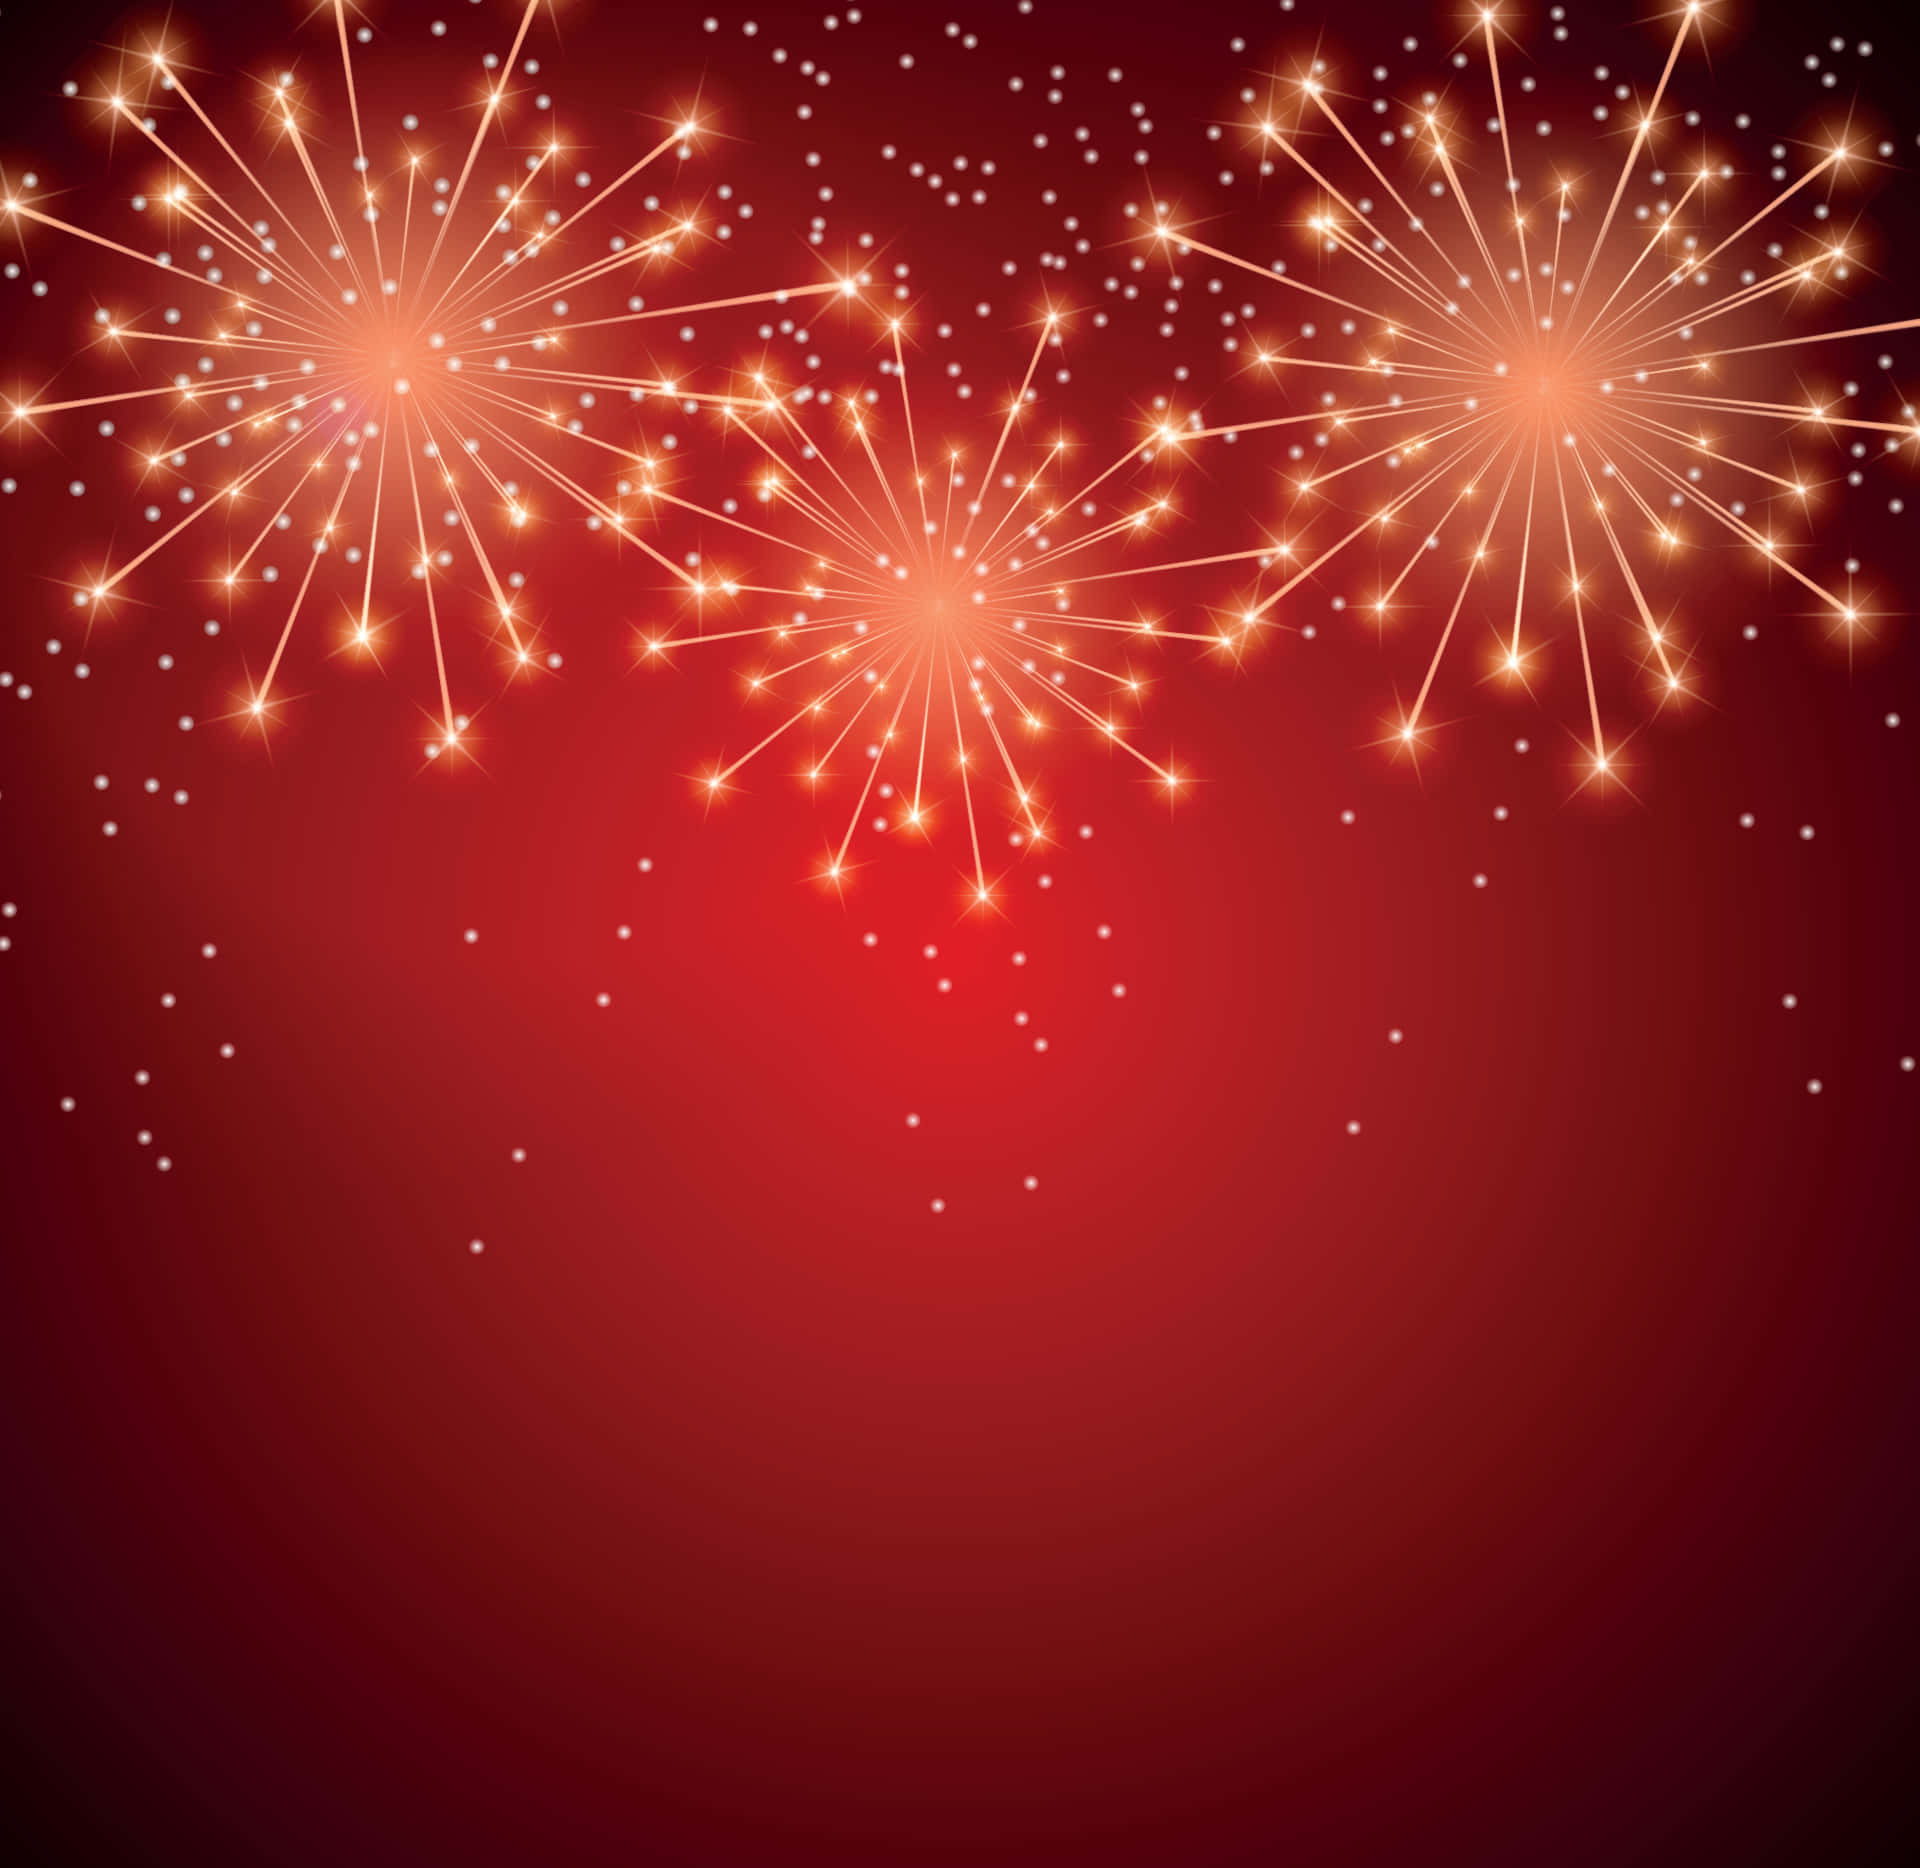 Chinese New Year Fireworks Background Poster